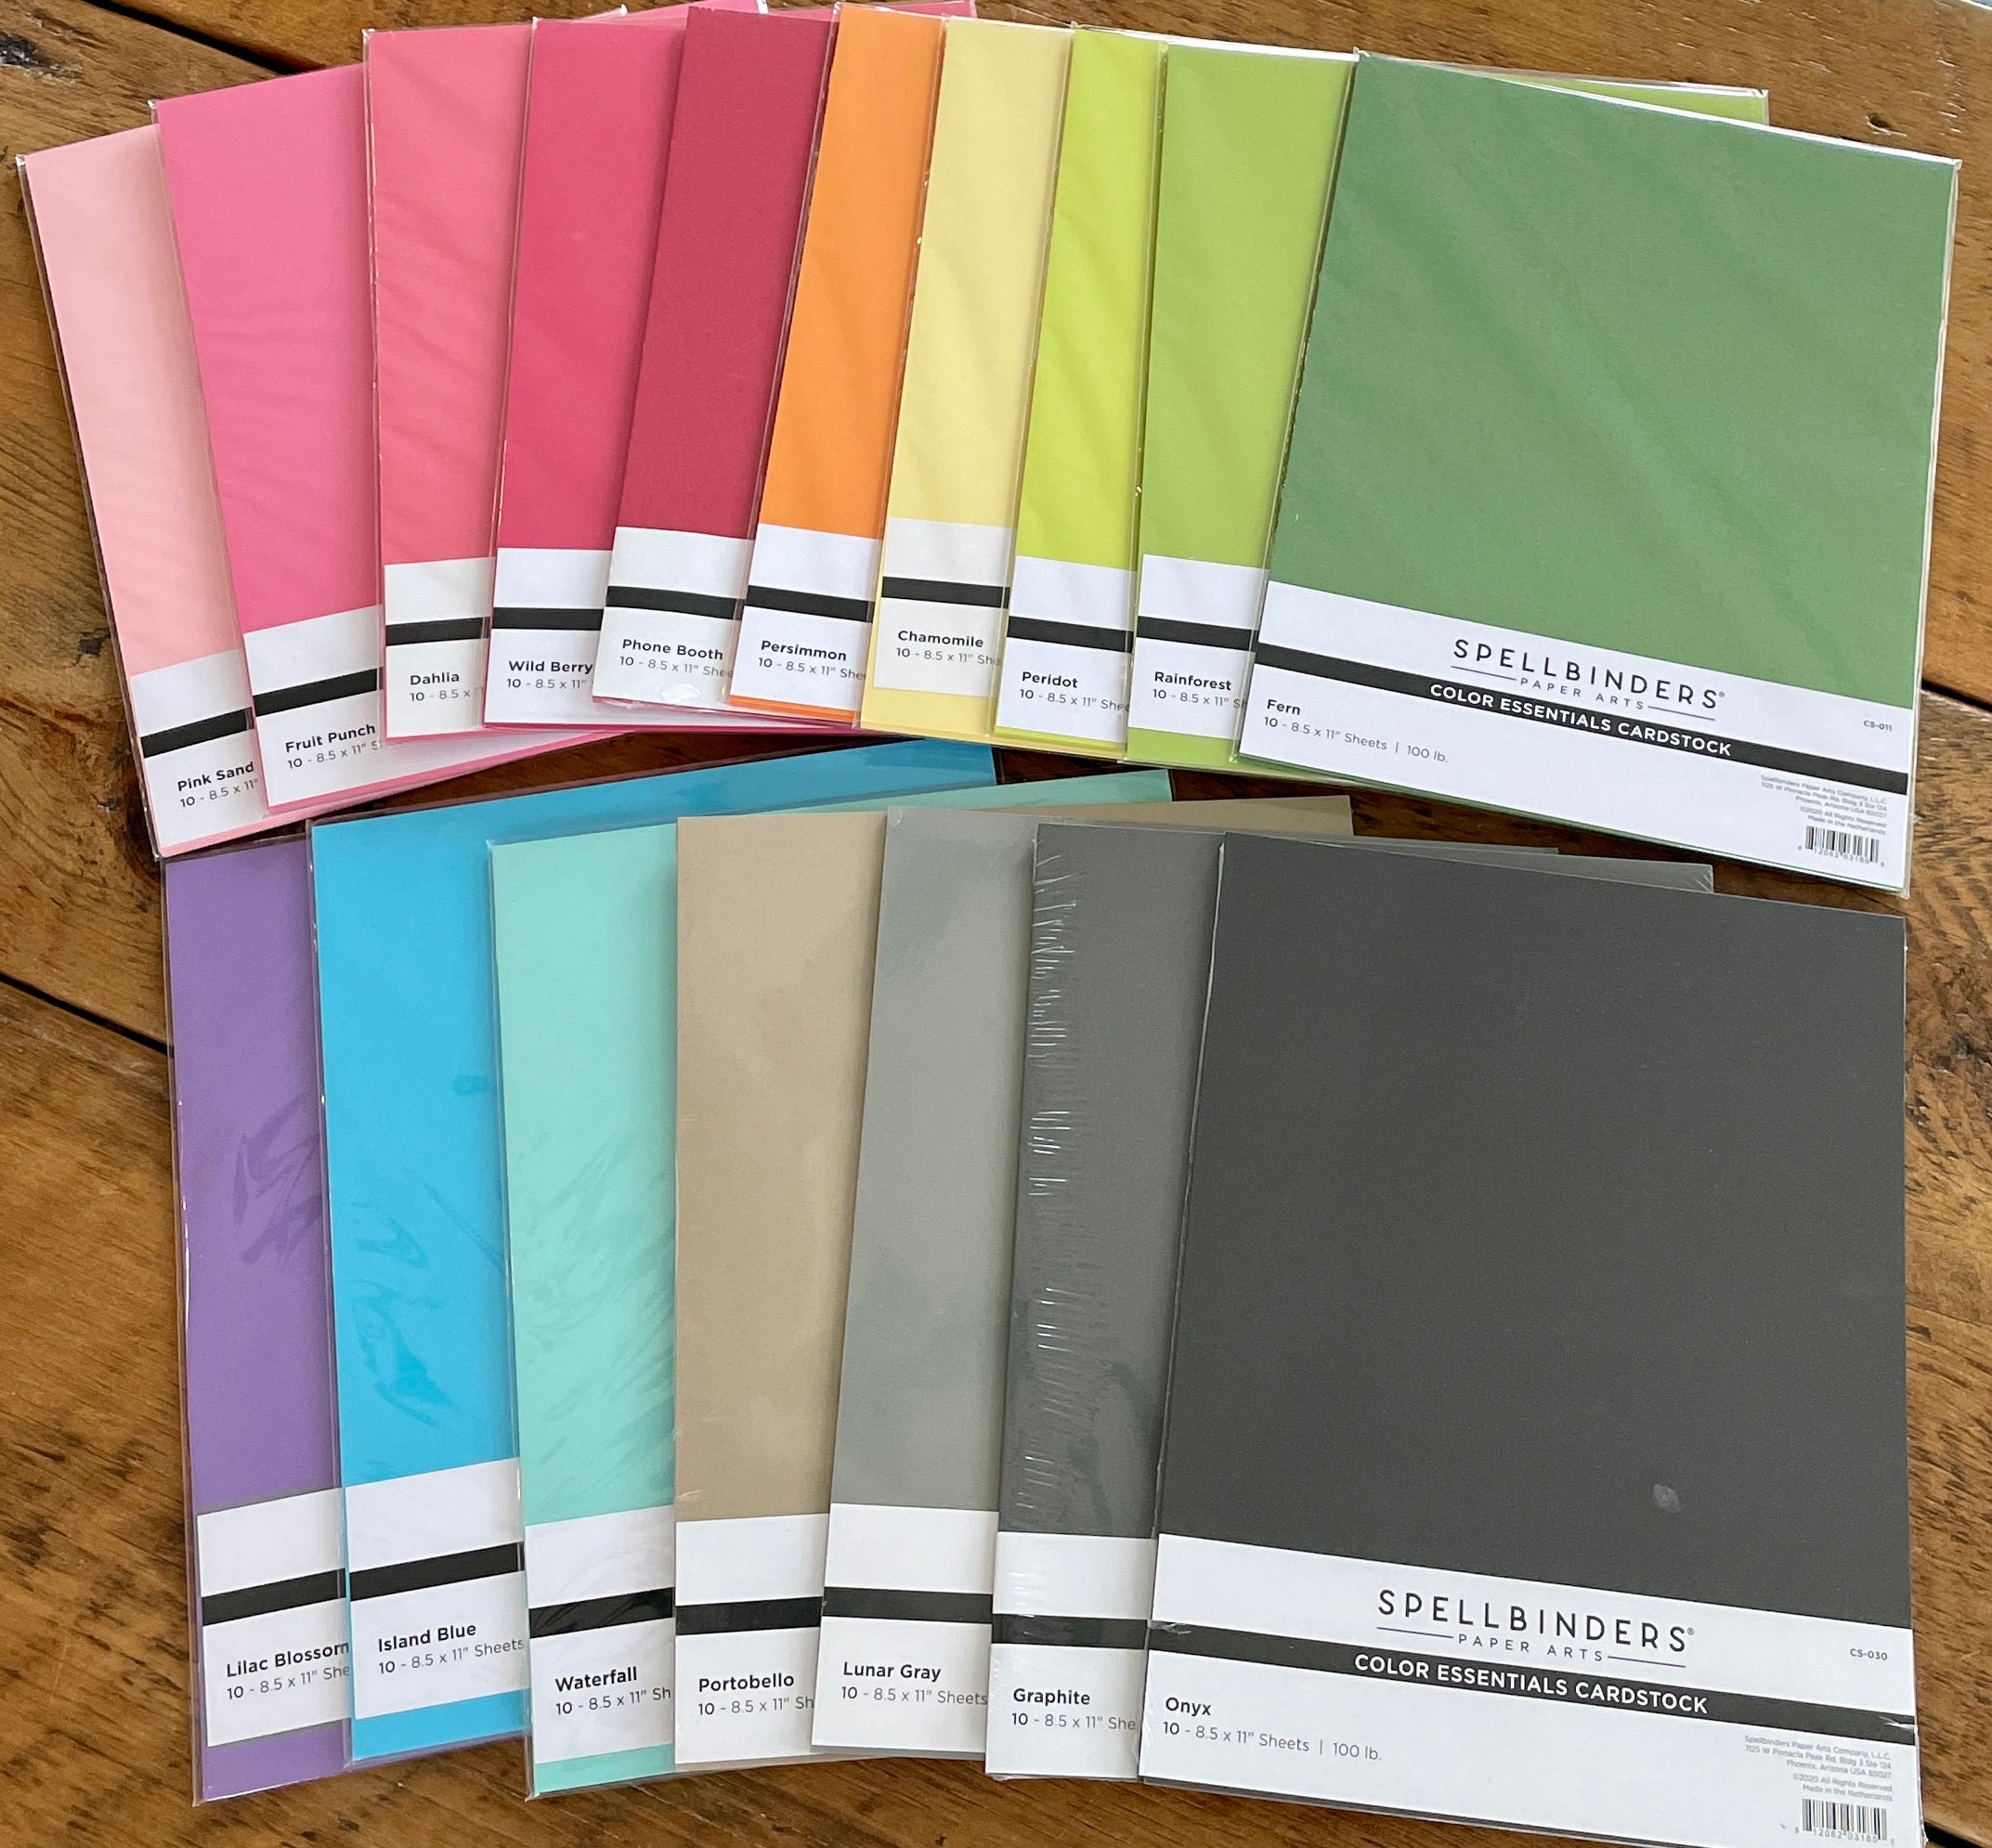 Neutral Palette 12 x 12 Cardstock Paper by Recollections 100 Sheets | Michaels